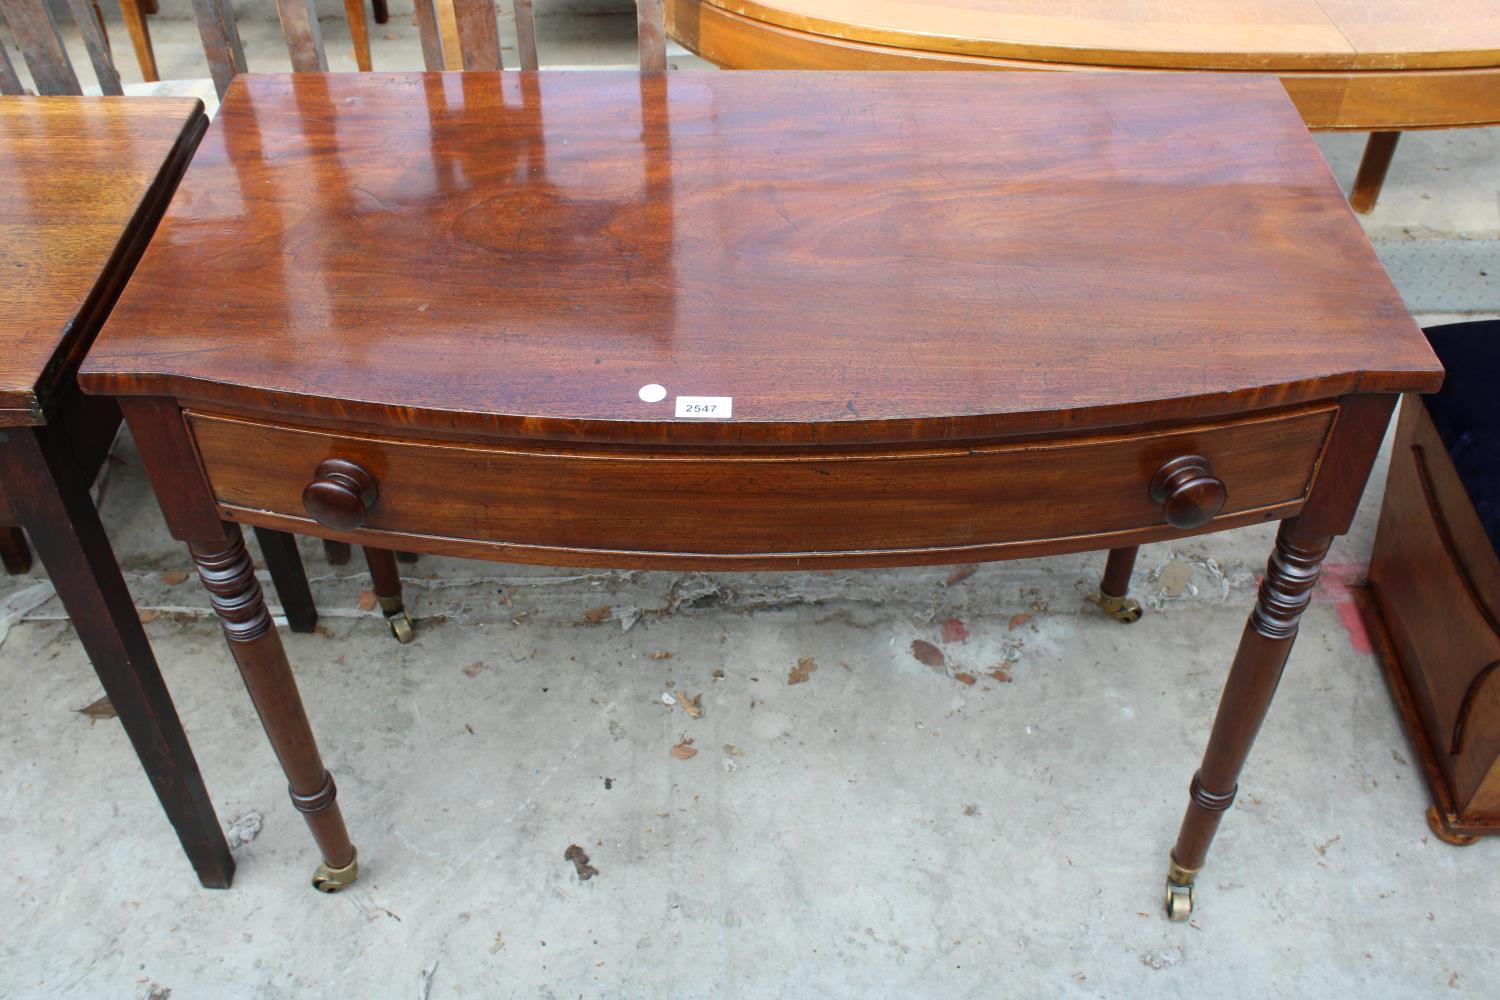 A 19TH CENTURY MAHOGANY BOW-FRONTED SIDE-TABLE WITH SINGLE DRAWER ON TURNED LEGS, 39.5" WIDE